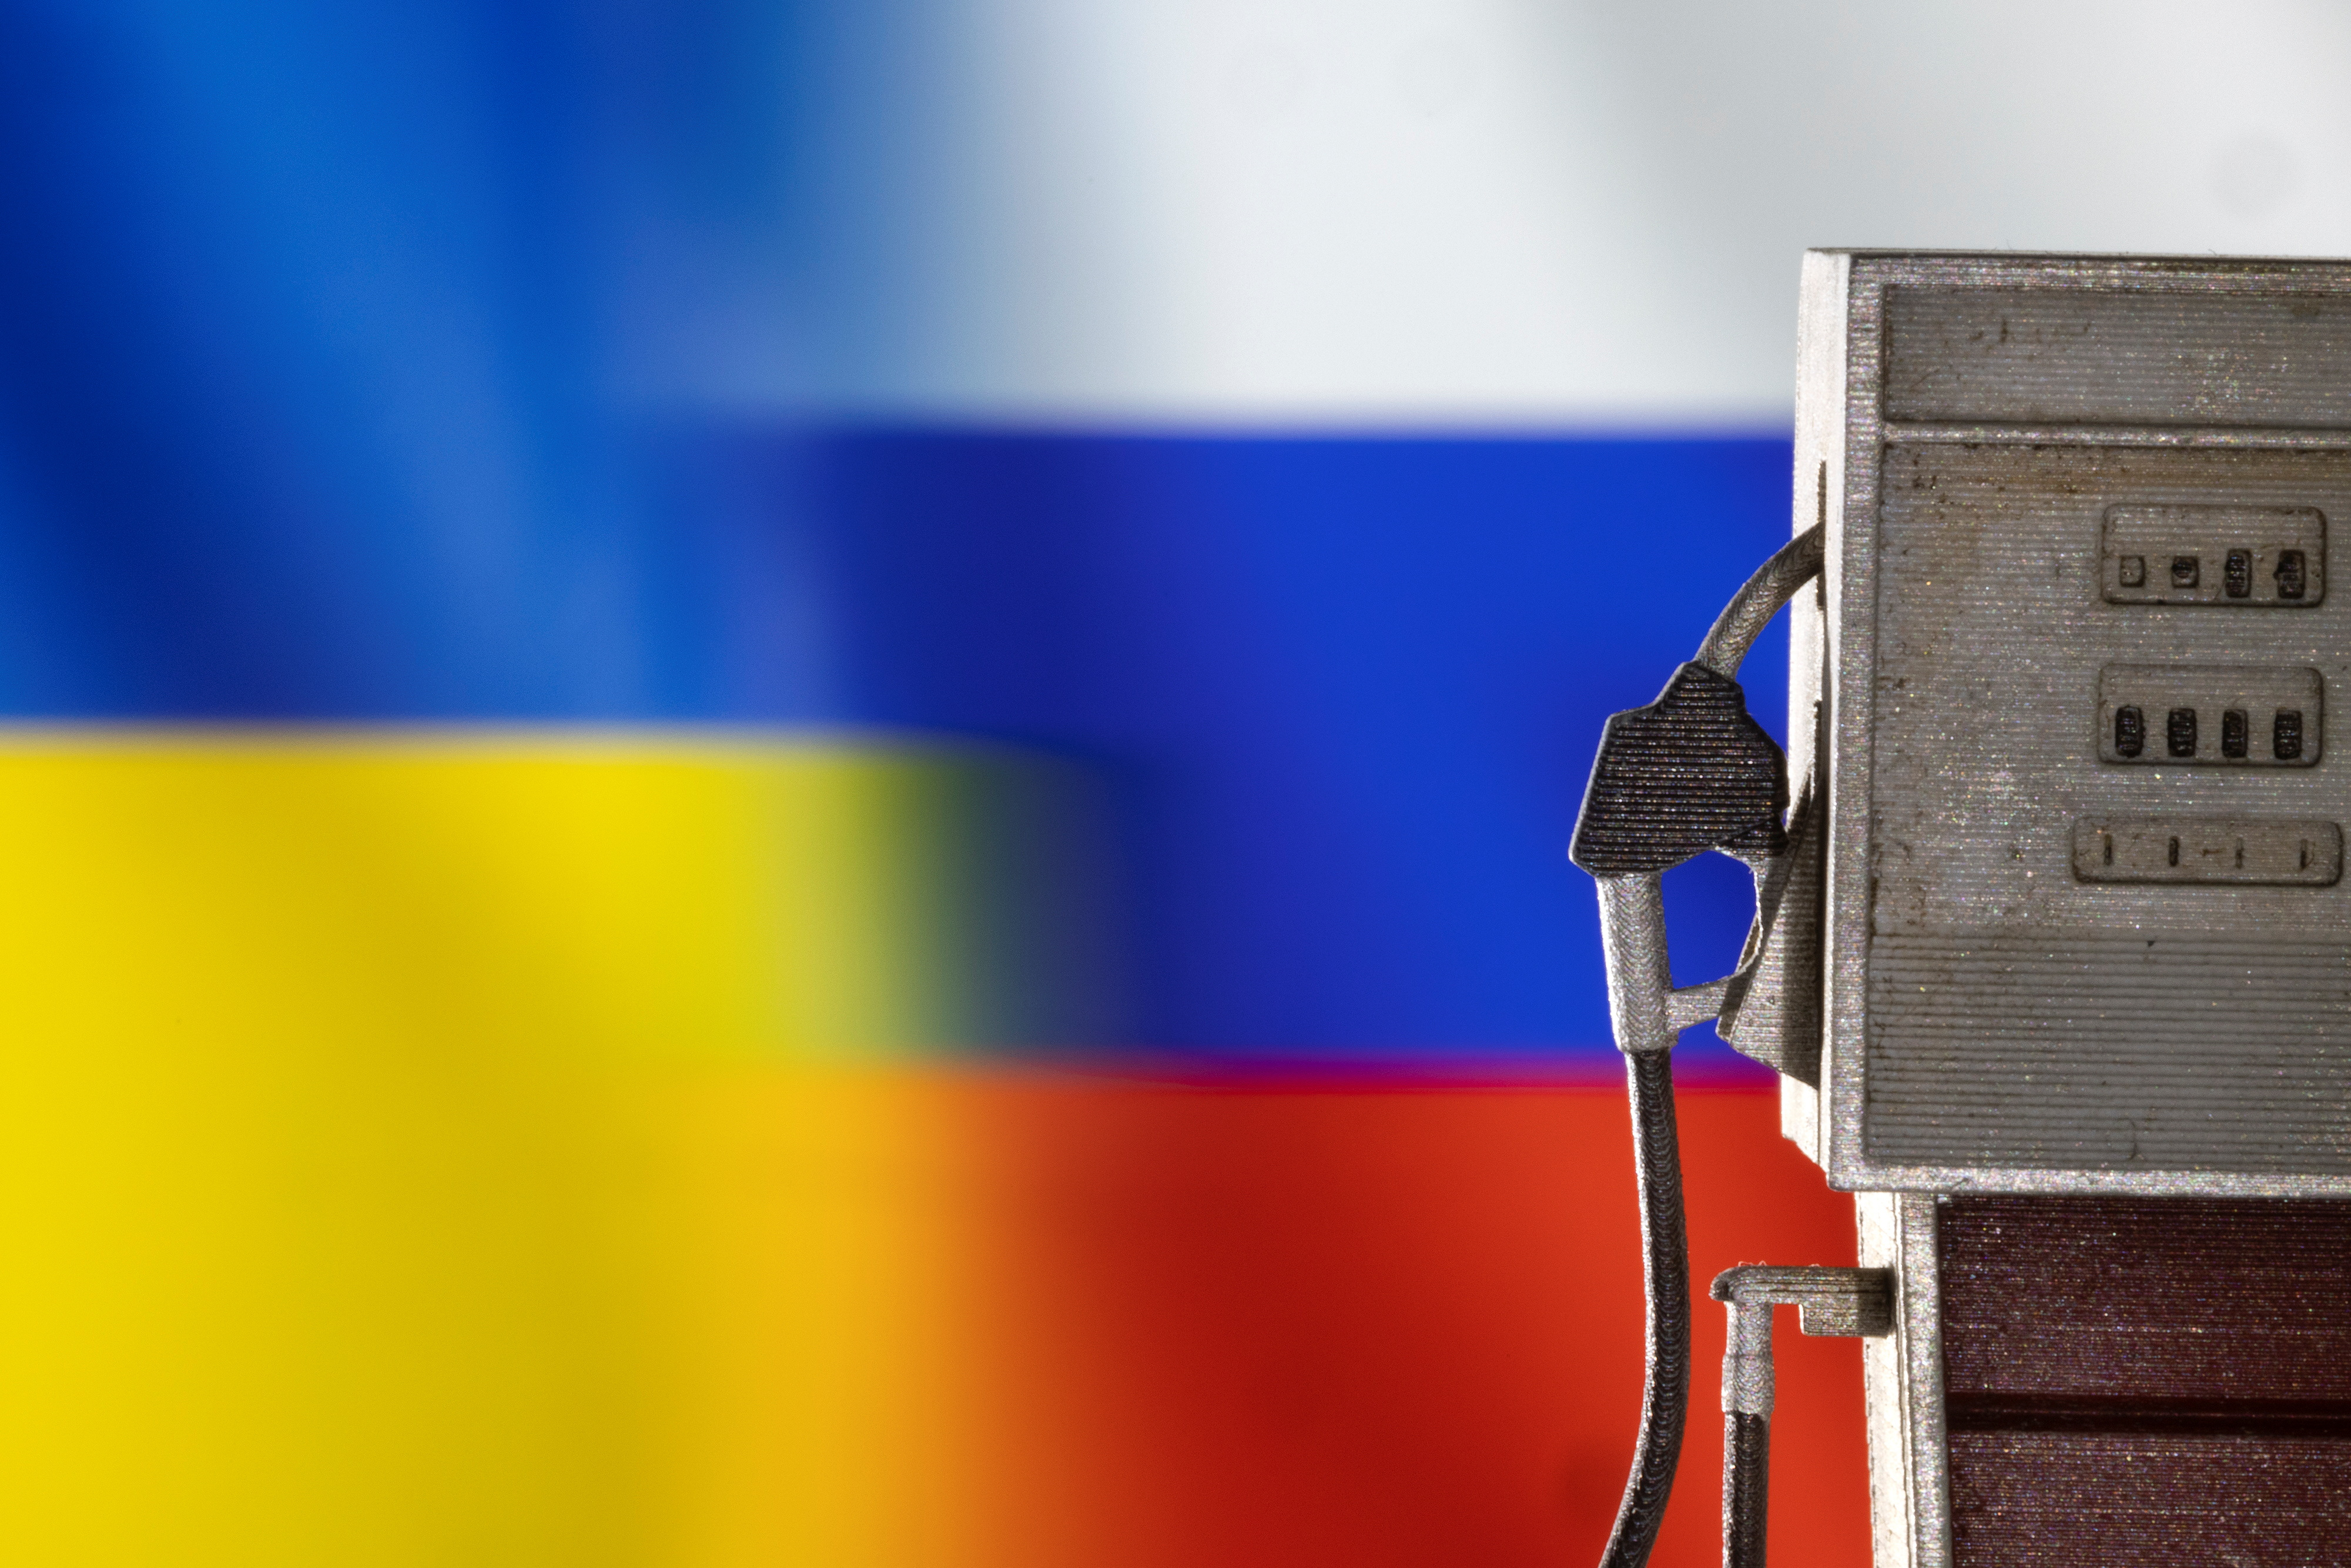 Illustration shows model of petrol pump, Ukraine and Russian flag colors